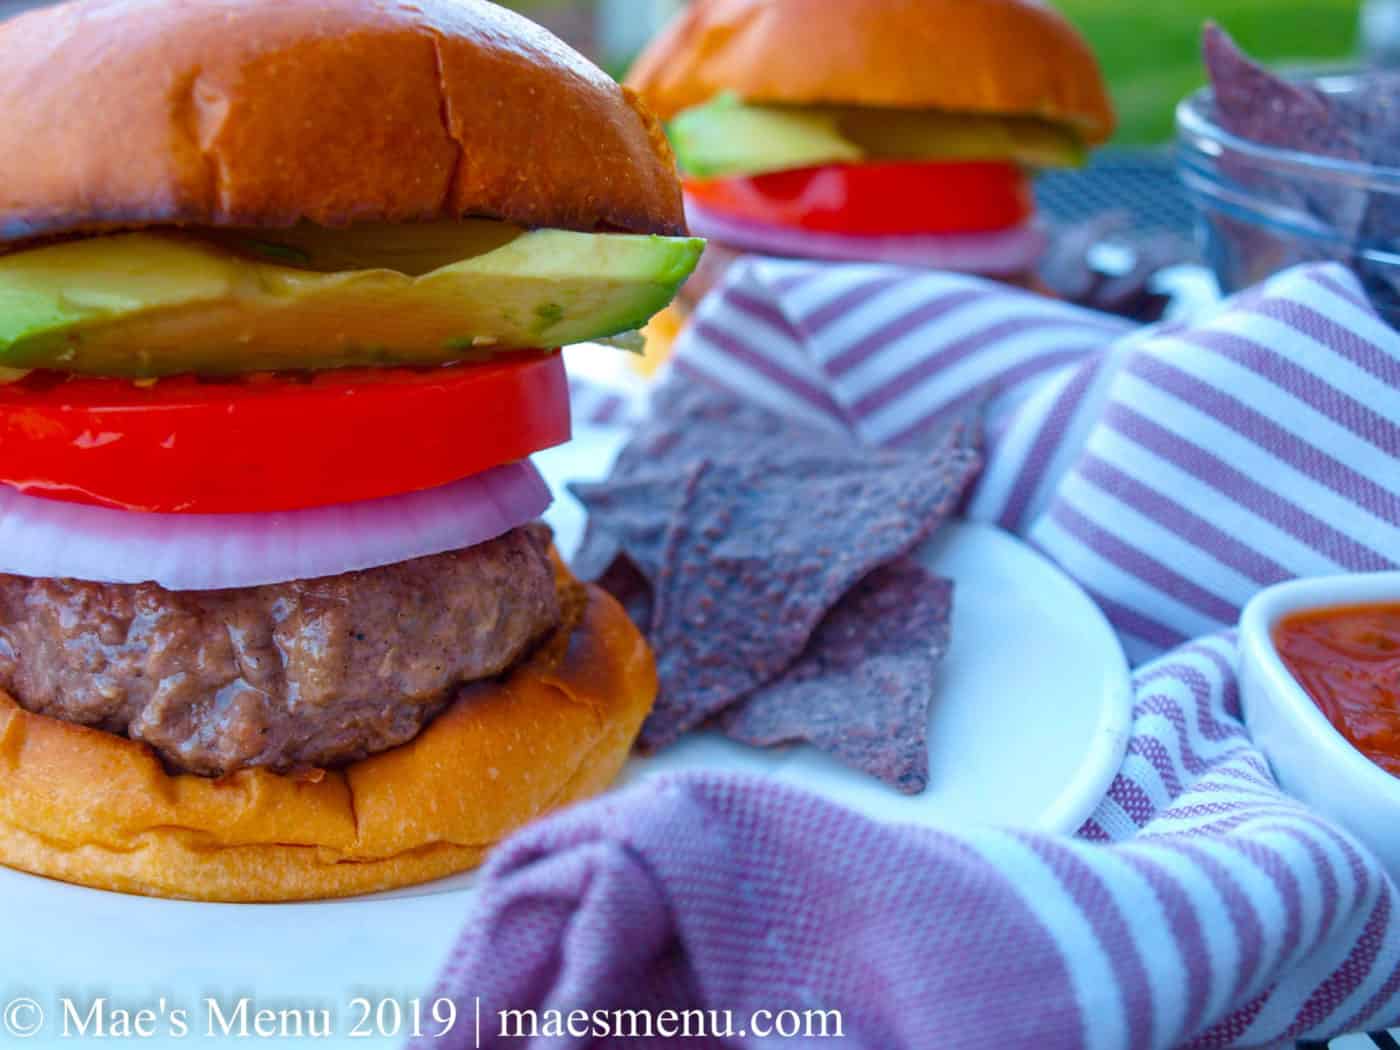 Two tall burgers with blue corn tortilla chips and a purple striped dish towel.